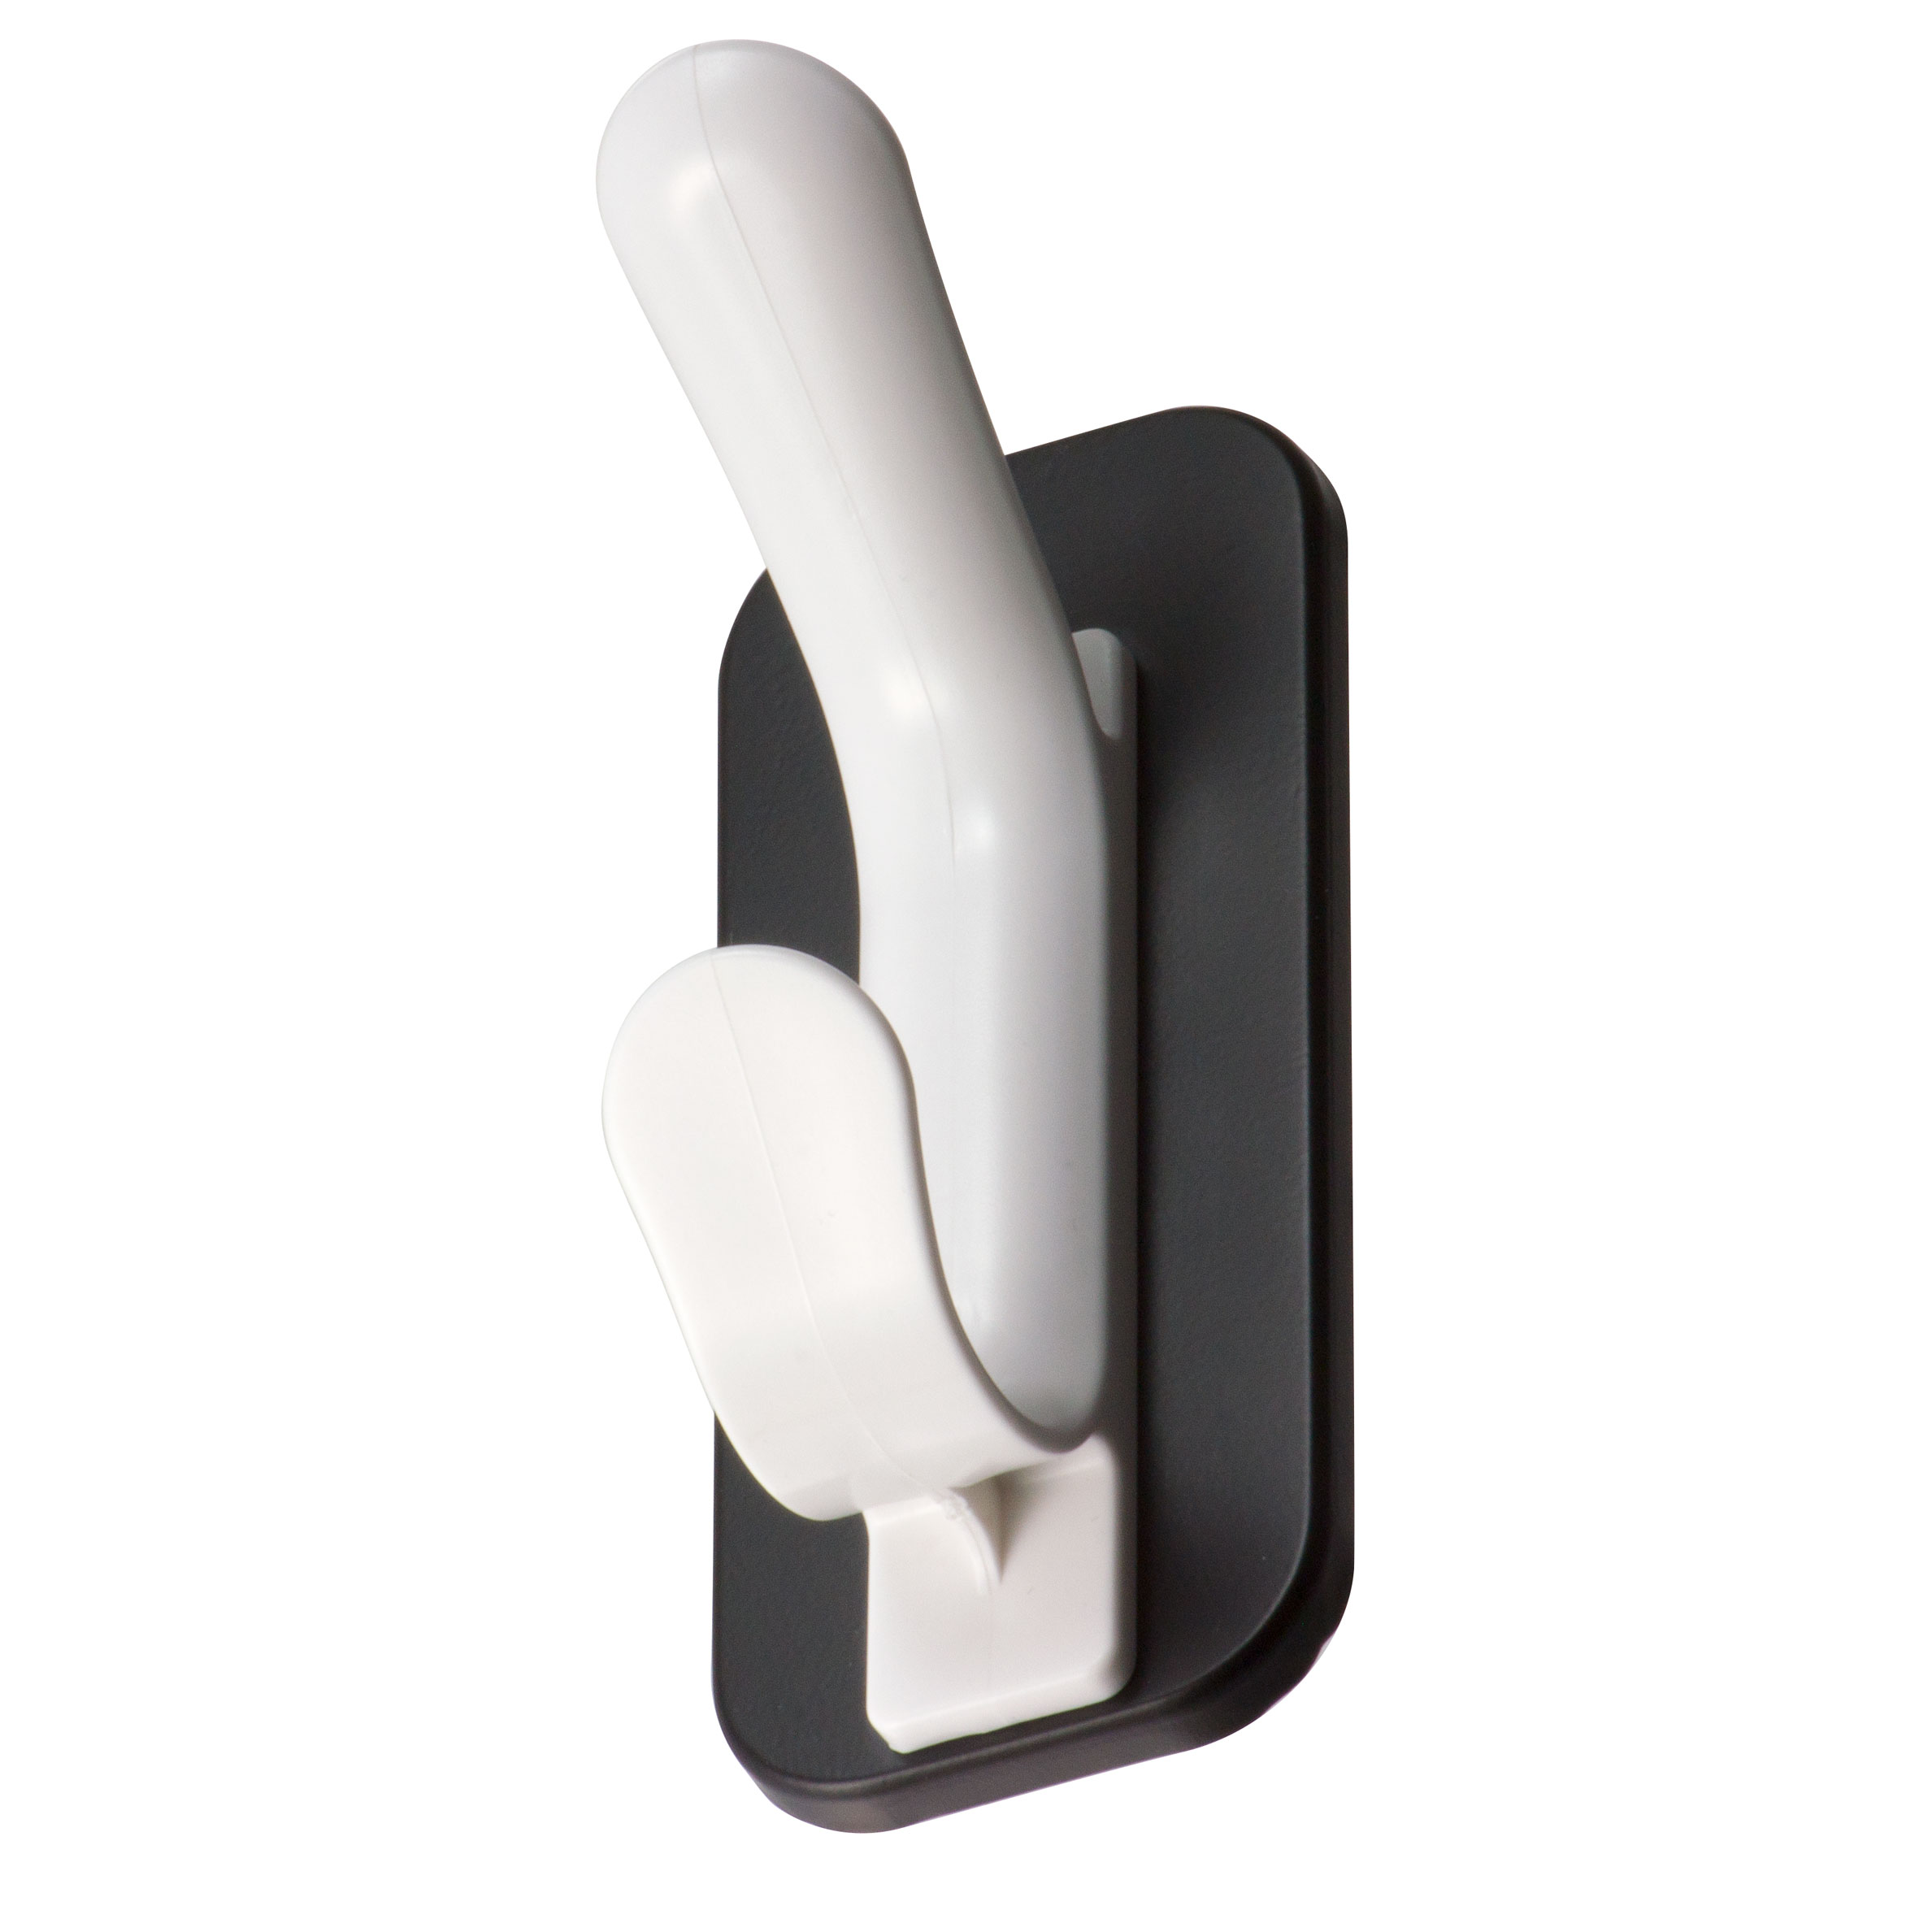 Officemate Magnet Plus Magnetic Double Coat Hook, Black/White (92522)